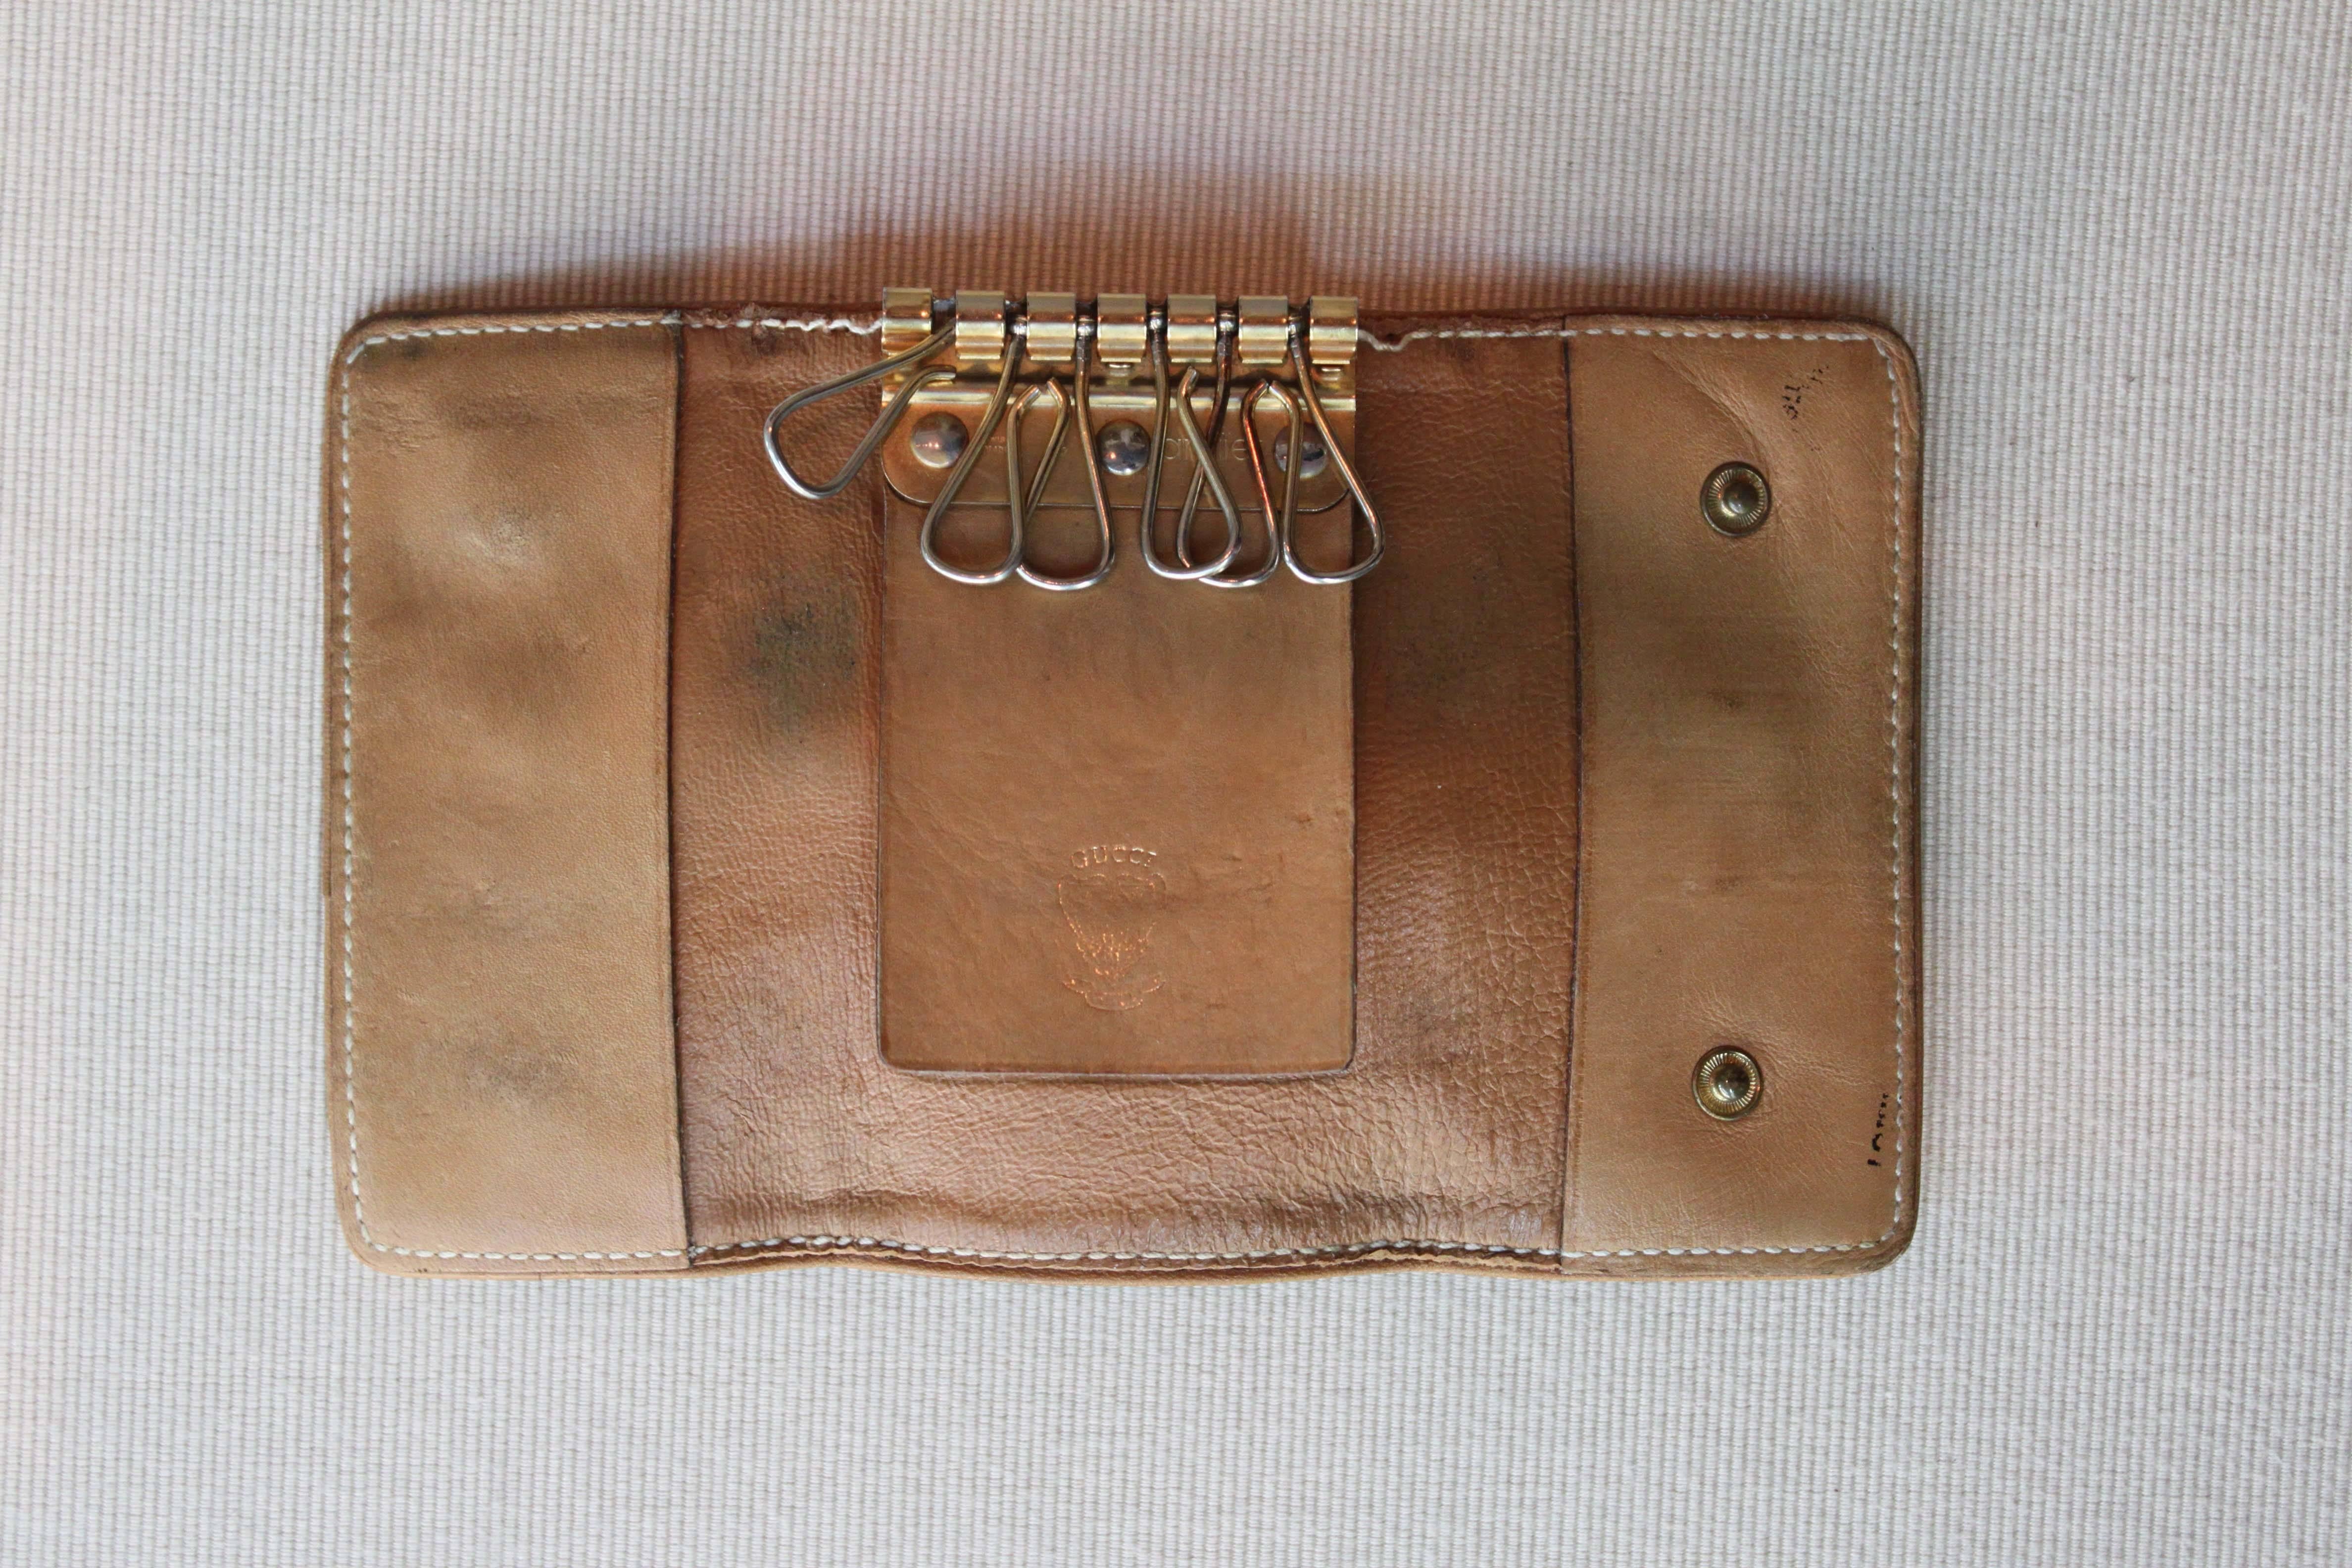 Vintage Gucci Logo Wallet and Key Case In Fair Condition For Sale In Vancouver, BC